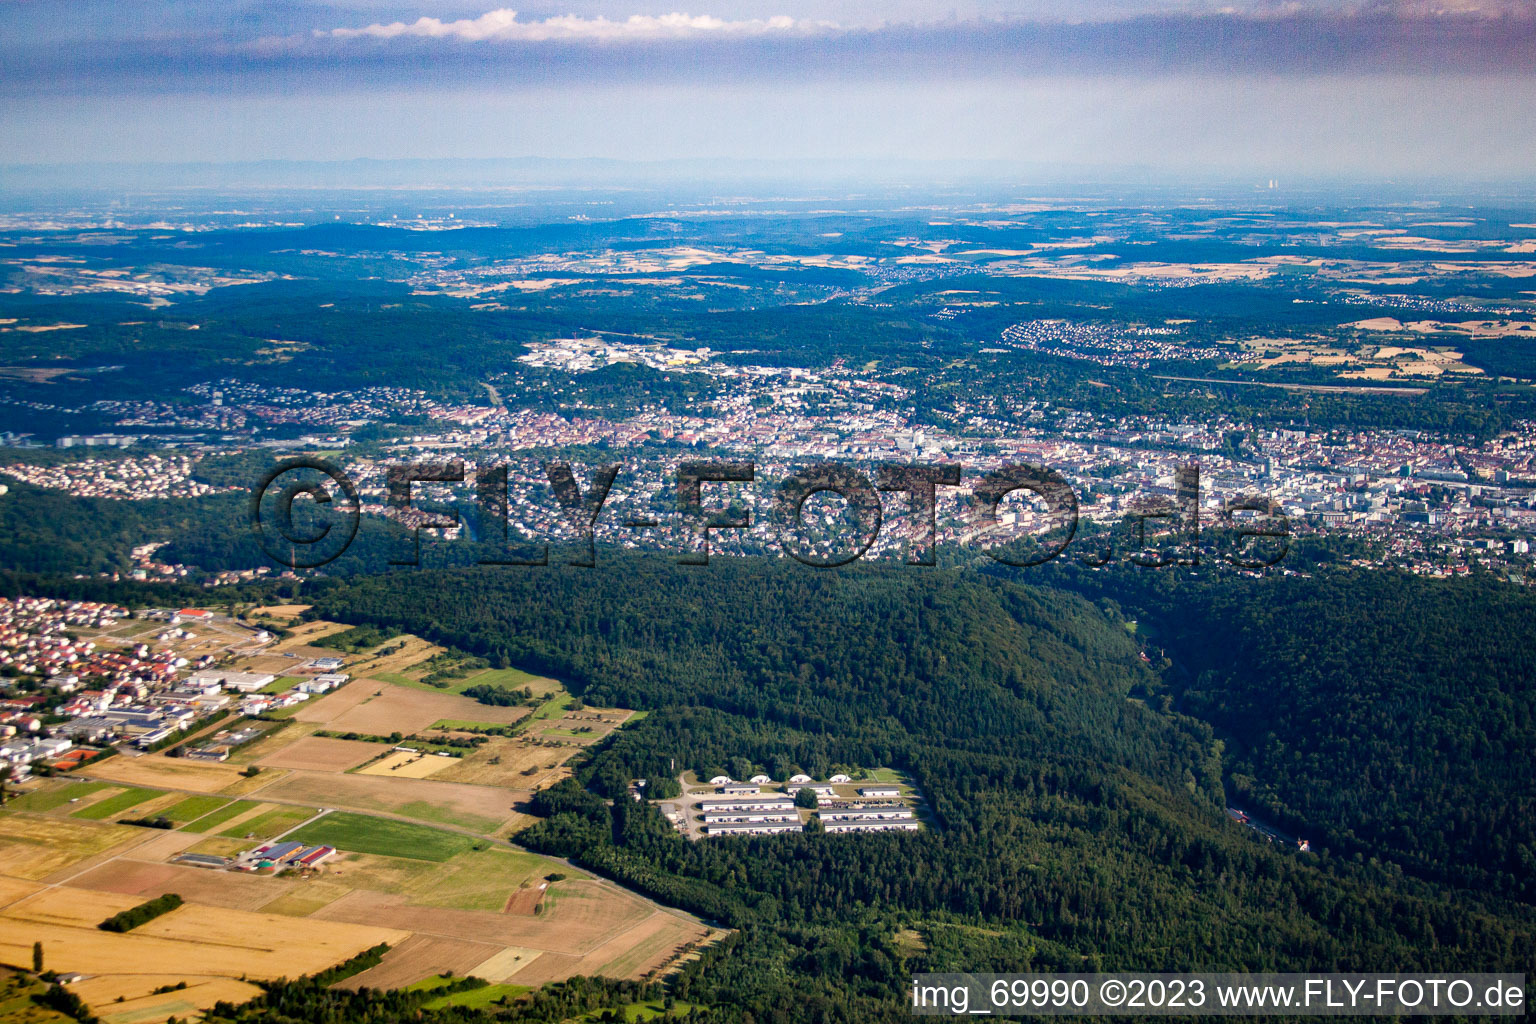 Drone image of Pforzheim in the state Baden-Wuerttemberg, Germany